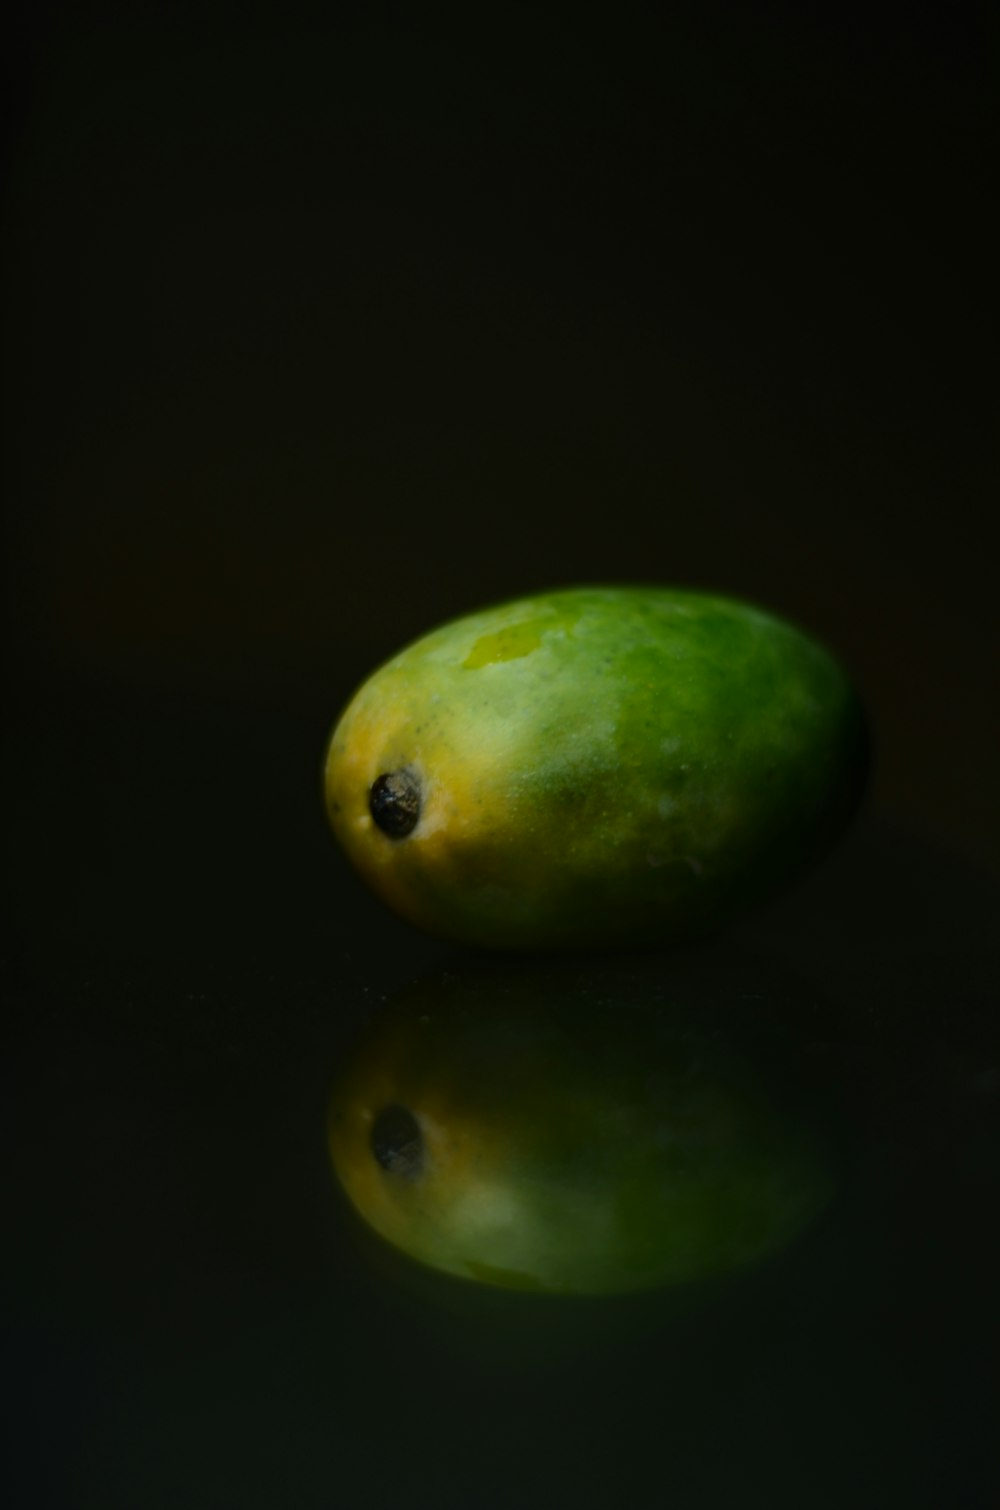 two green round fruits on white surface